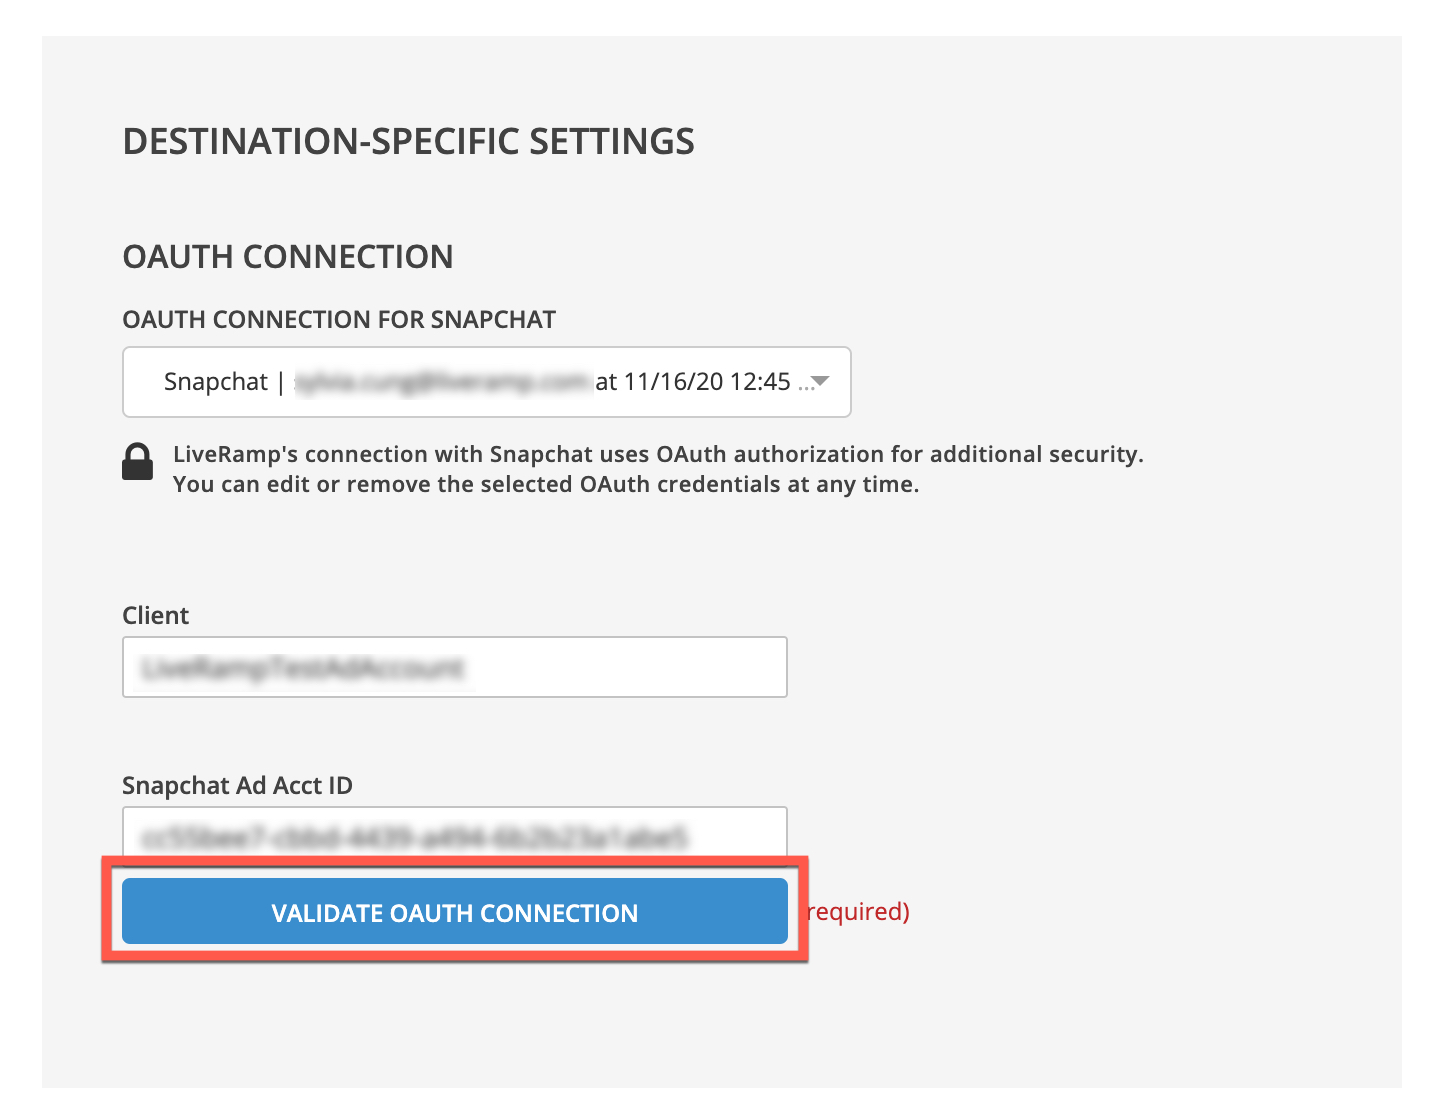 C-Activate_New_Destination_Account-Validate_OAuth_Connection_button.jpg